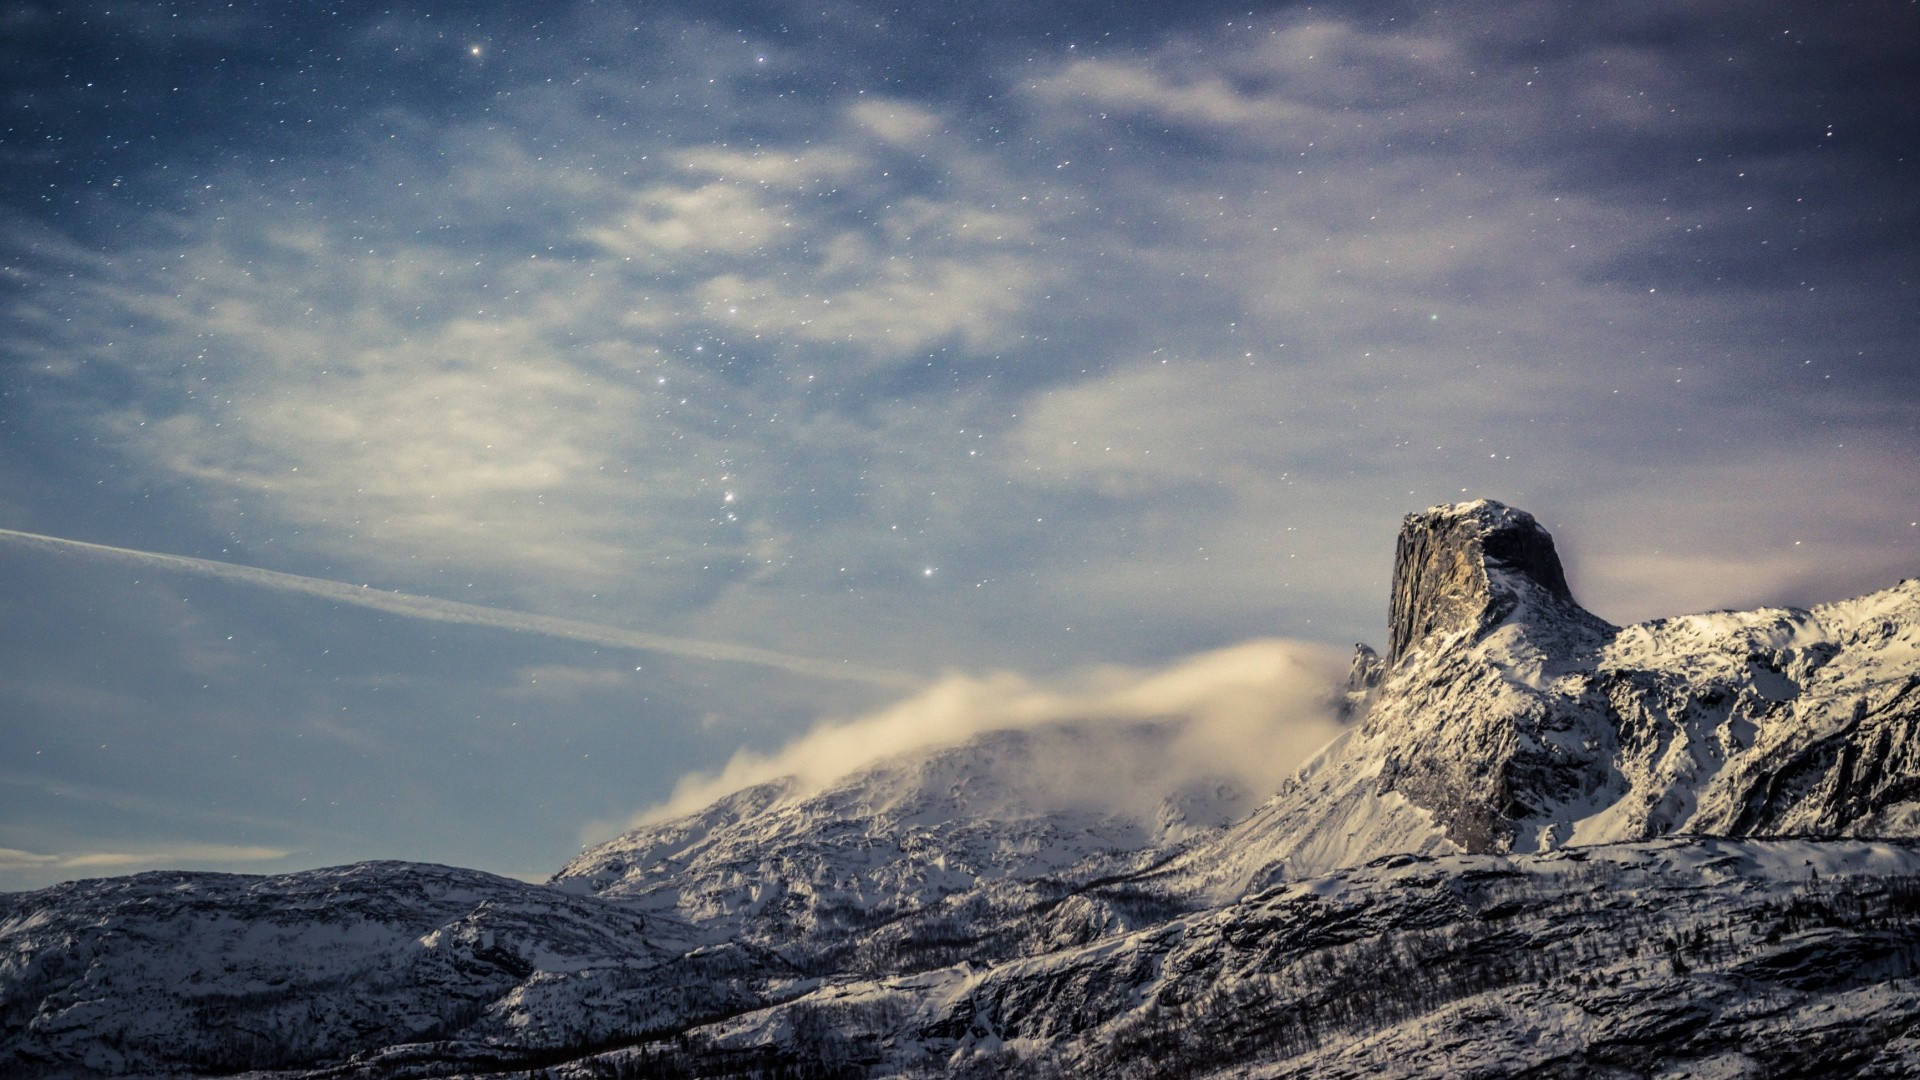 General 1920x1080 landscape nature sky winter snow mountains stars snowy peak cold ice outdoors snowy mountain